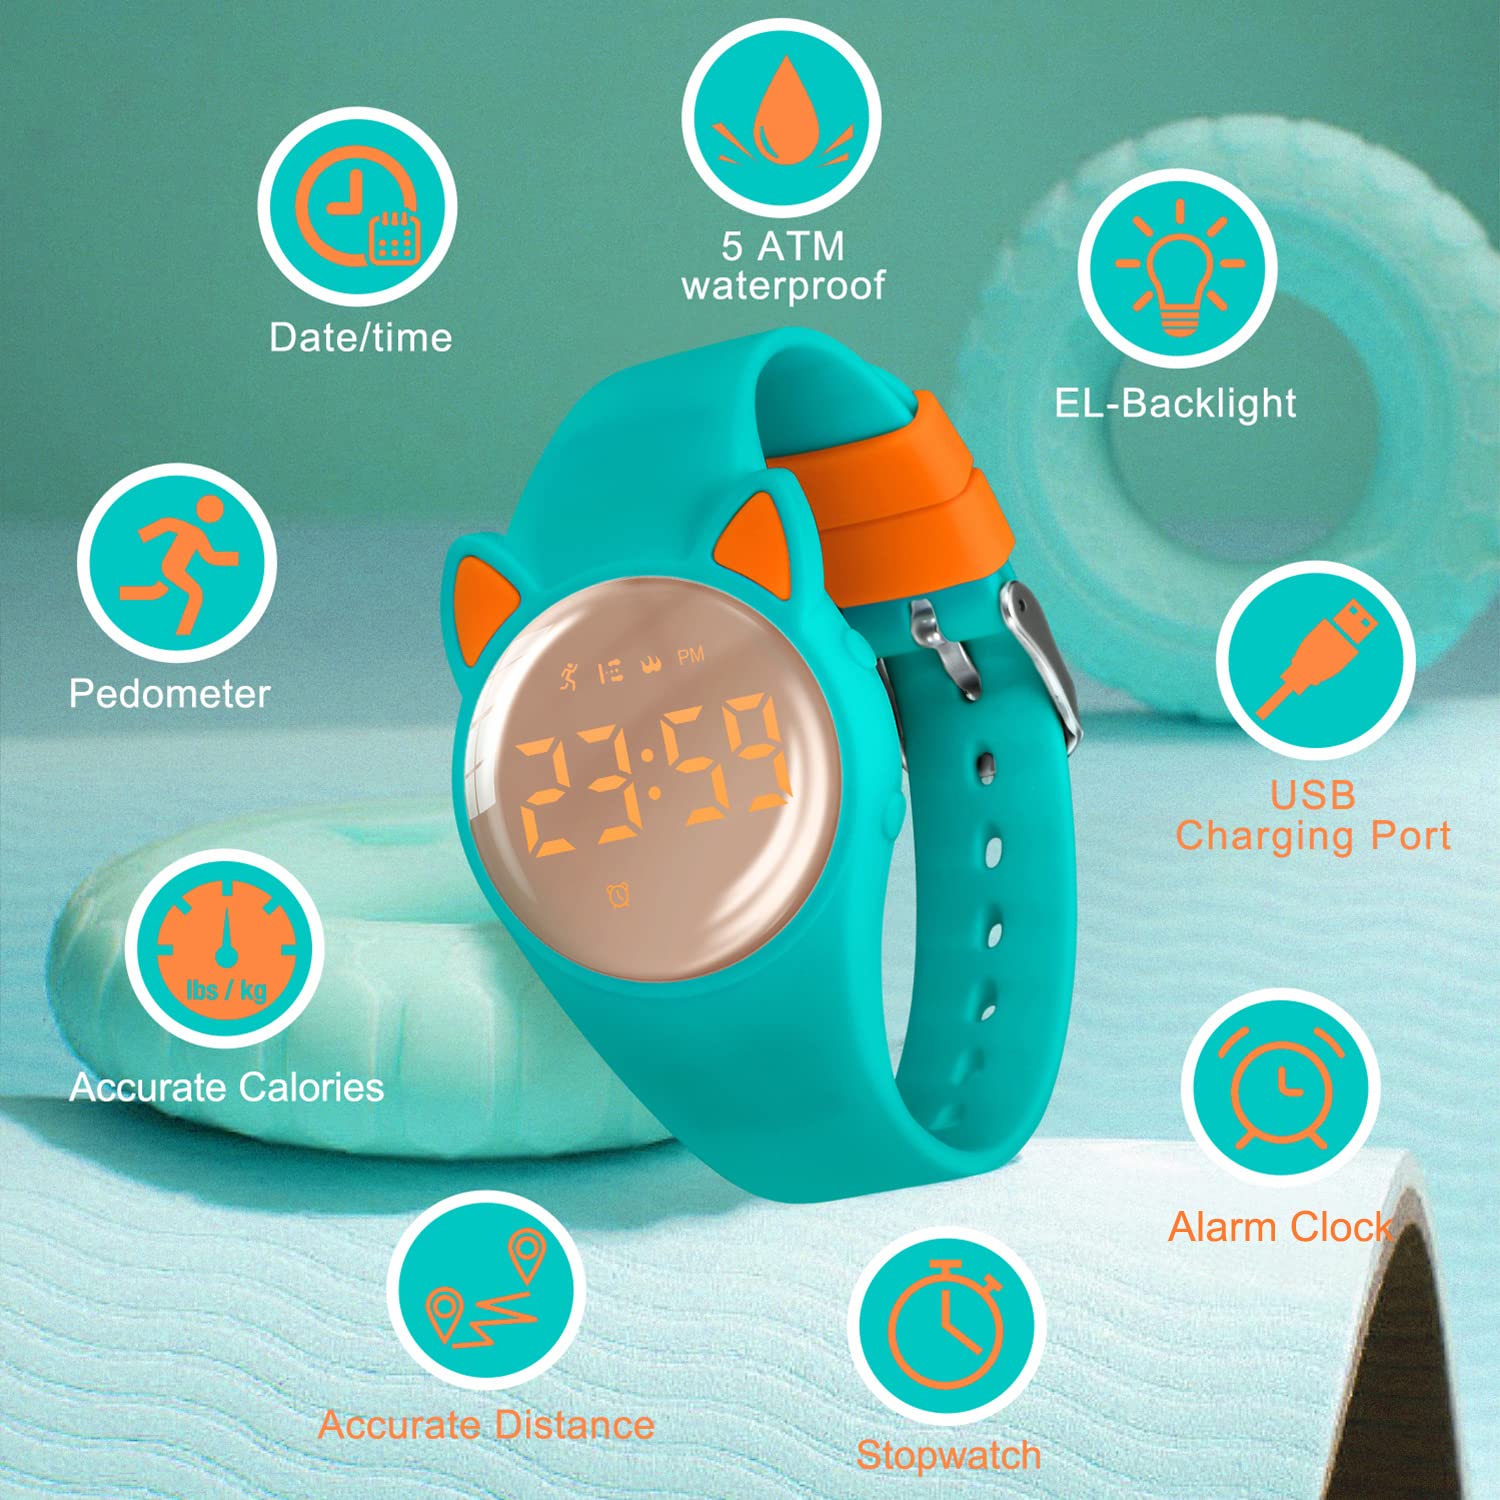 Kids Fitness Tracker Watch, Digital Activity Tracker Watch for Kids Ages 3-12, Non-Bluetooth, Alarm/Calorie/Pedometer Count Steps Wrist Watch for Kids, DJ-GreenOrange-Y